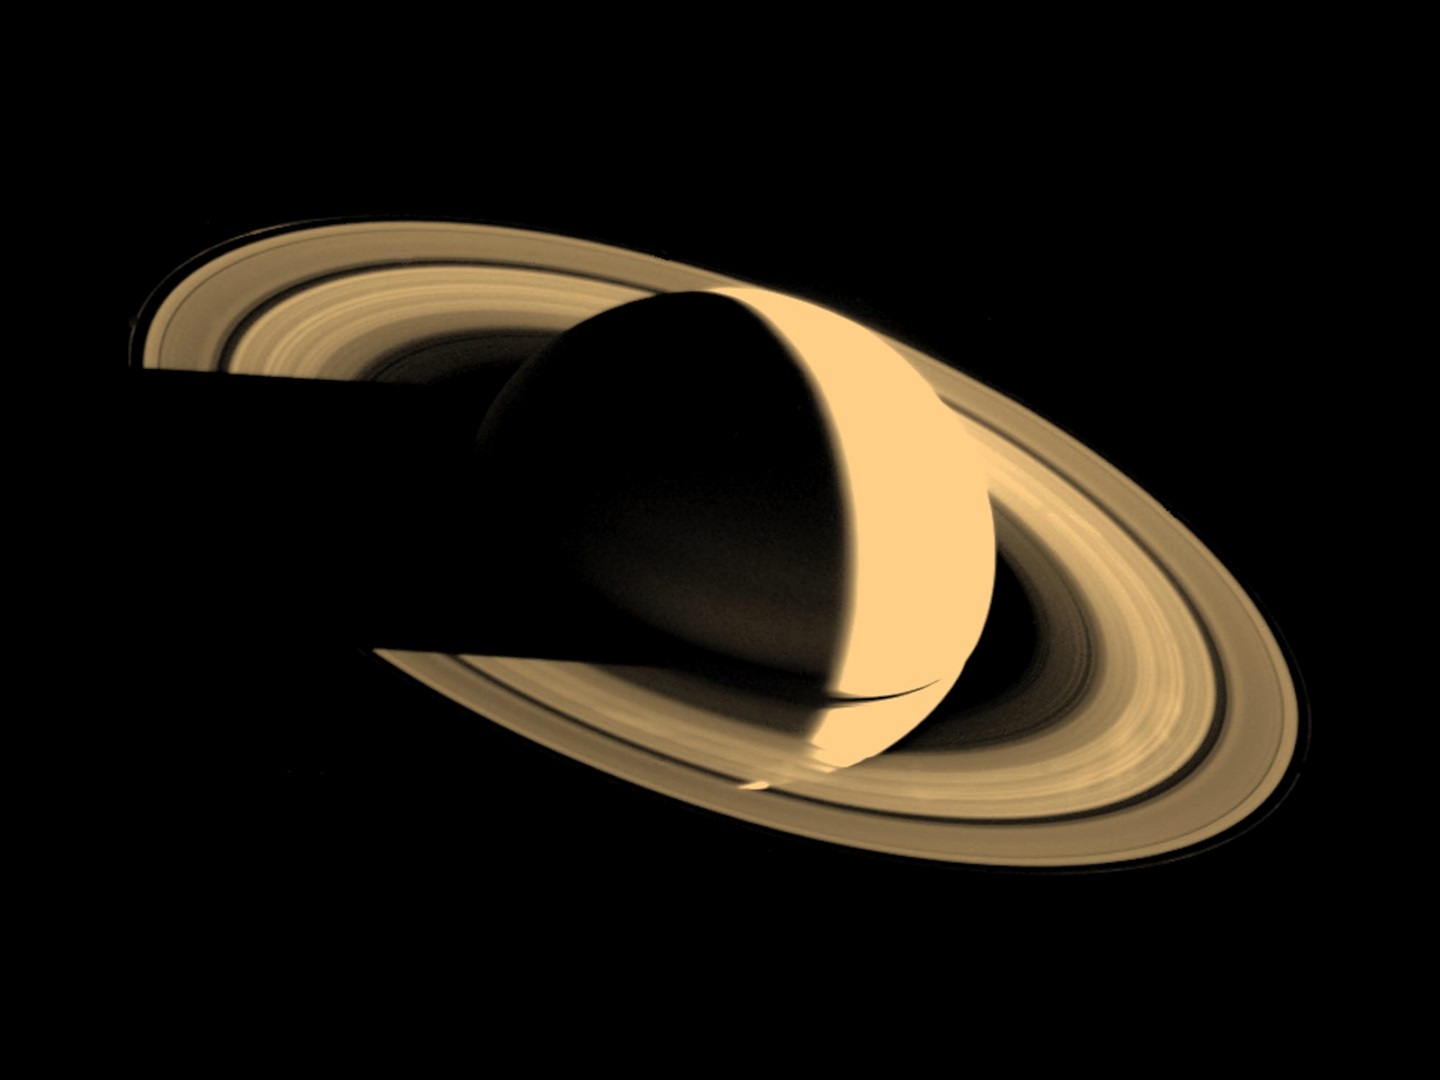 Voyager 1 looked back to Saturn on November 16 1980 to give this unique perspective on its rings. NASA/JPL